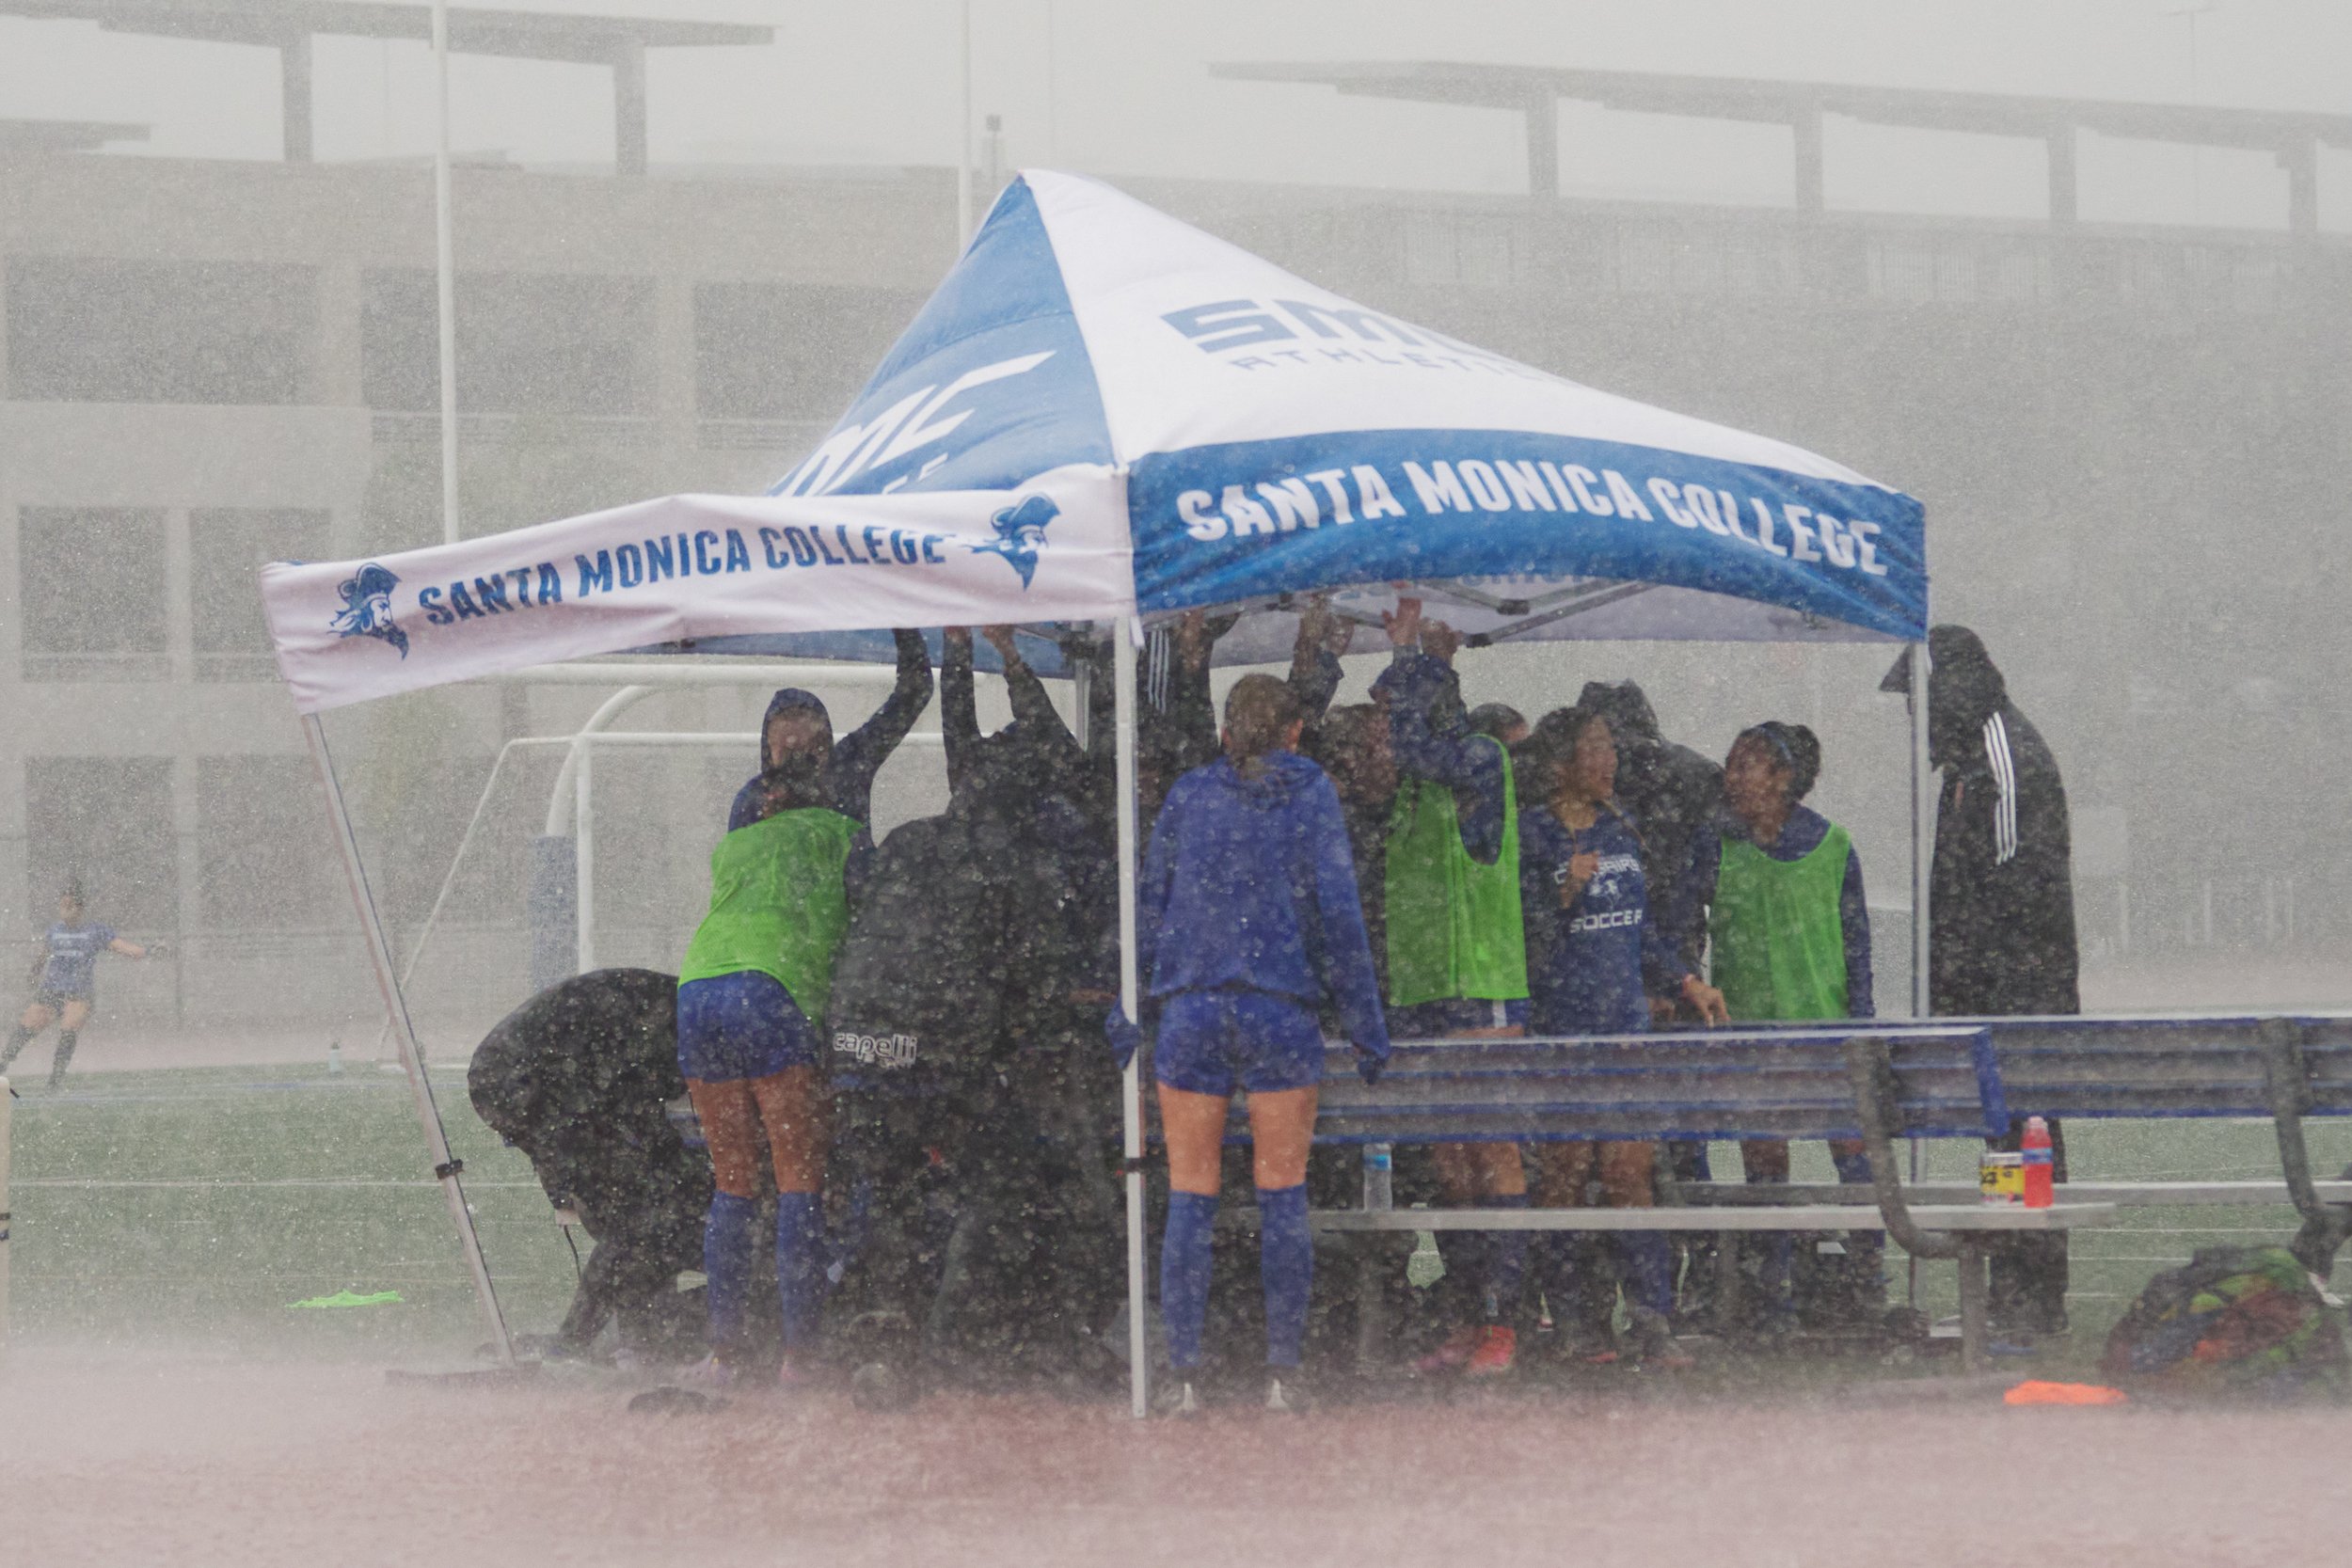  The Santa Monica College Corsairs Women's Soccer team huddles under and holds down their tent during a sudden rainstorm before the match against the Citrus College Owls on Tuesday, Nov. 8, 2022, at Corsair Field in Santa Monica, Calif. The Corsairs 